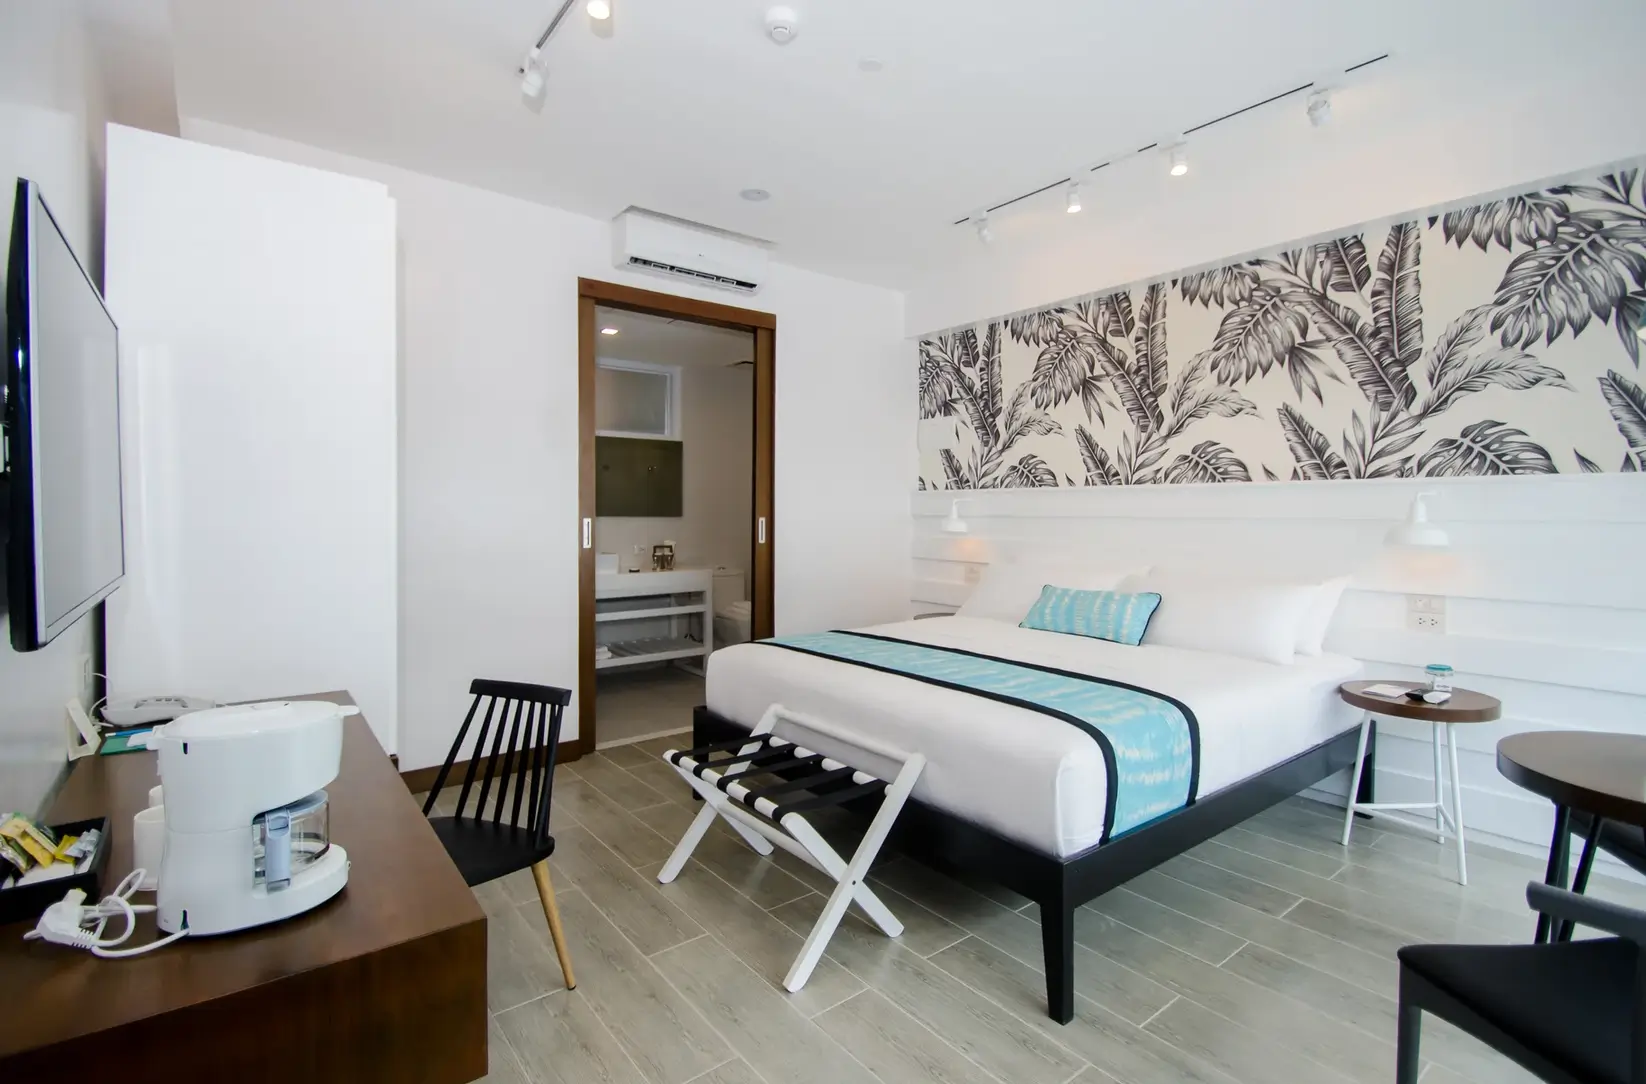 Spacious premiere room at Coast Boracay, decorated with a large bed against a botanical print wall. The room includes modern furniture, such as a sleek black bench and a small work area, providing both comfort and style.